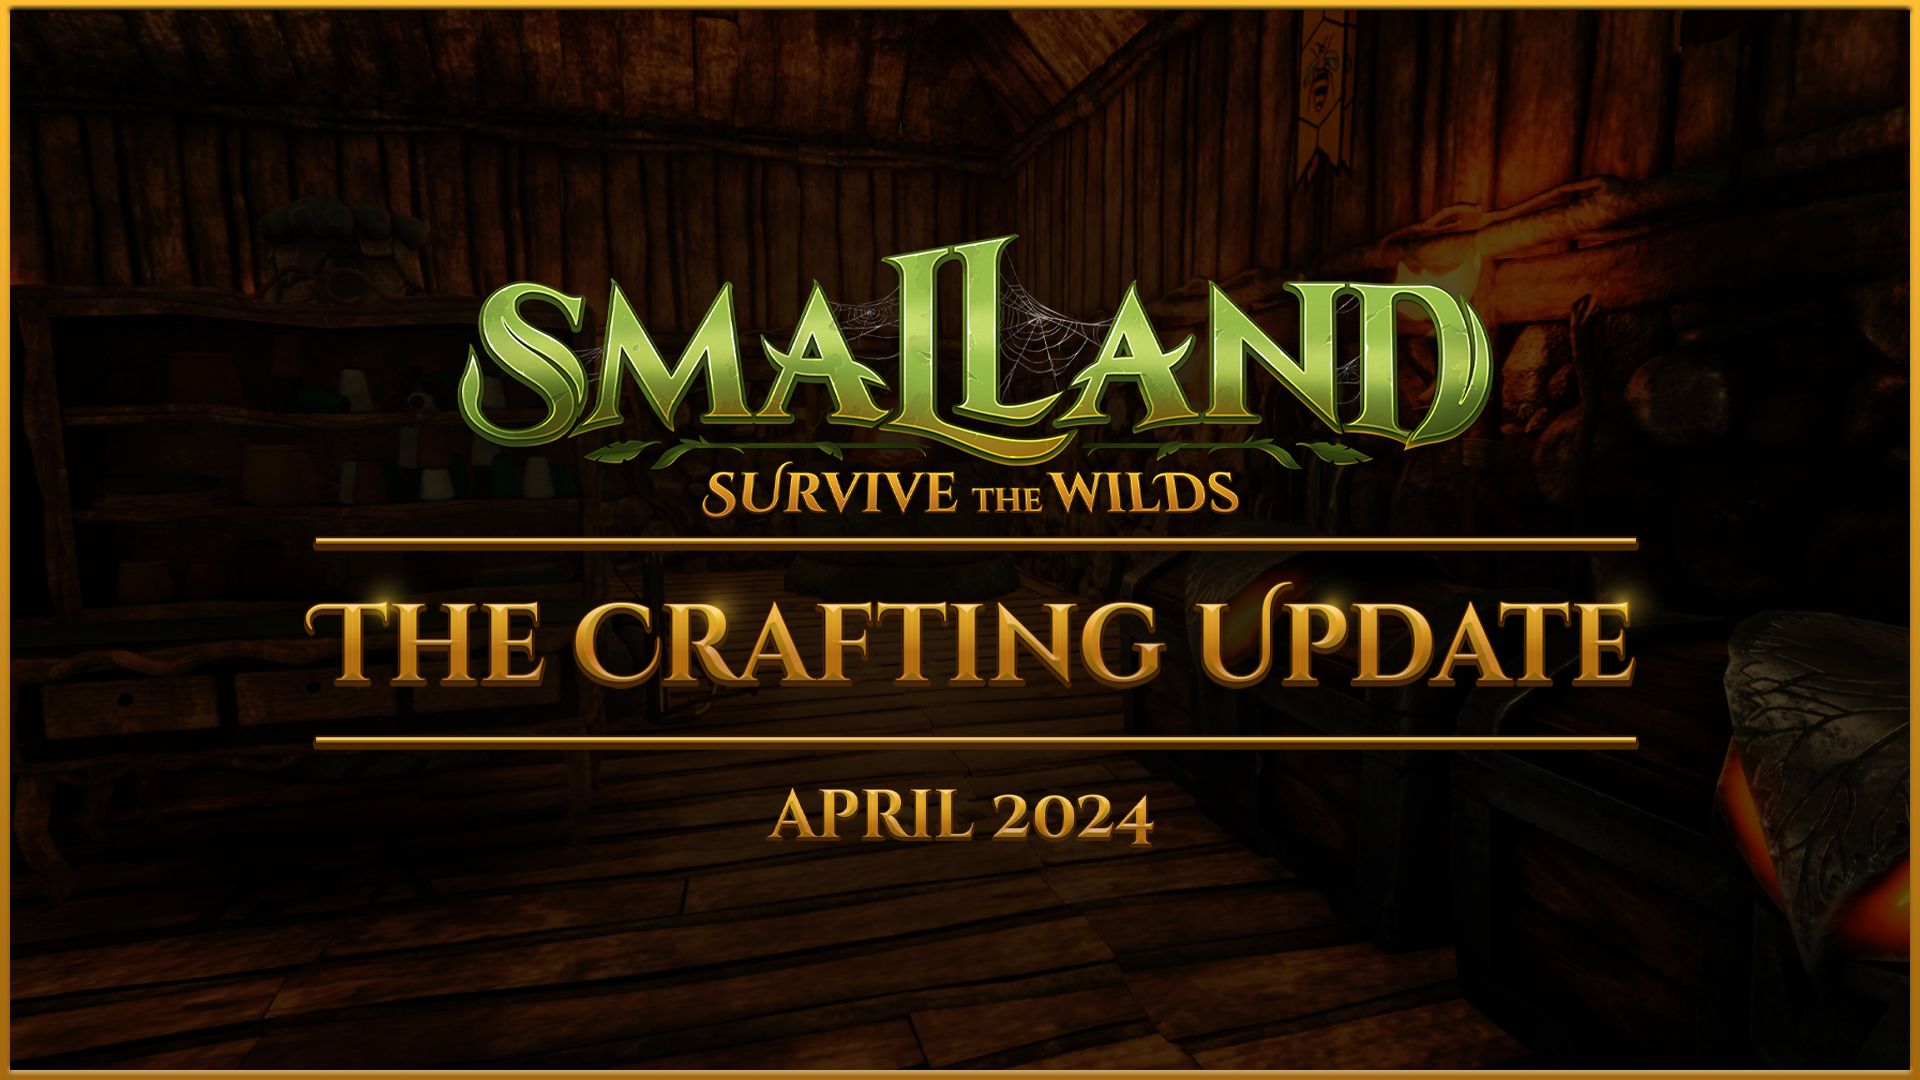 Smalland: Survive the Wids | The Crafting Update - Patch Notes